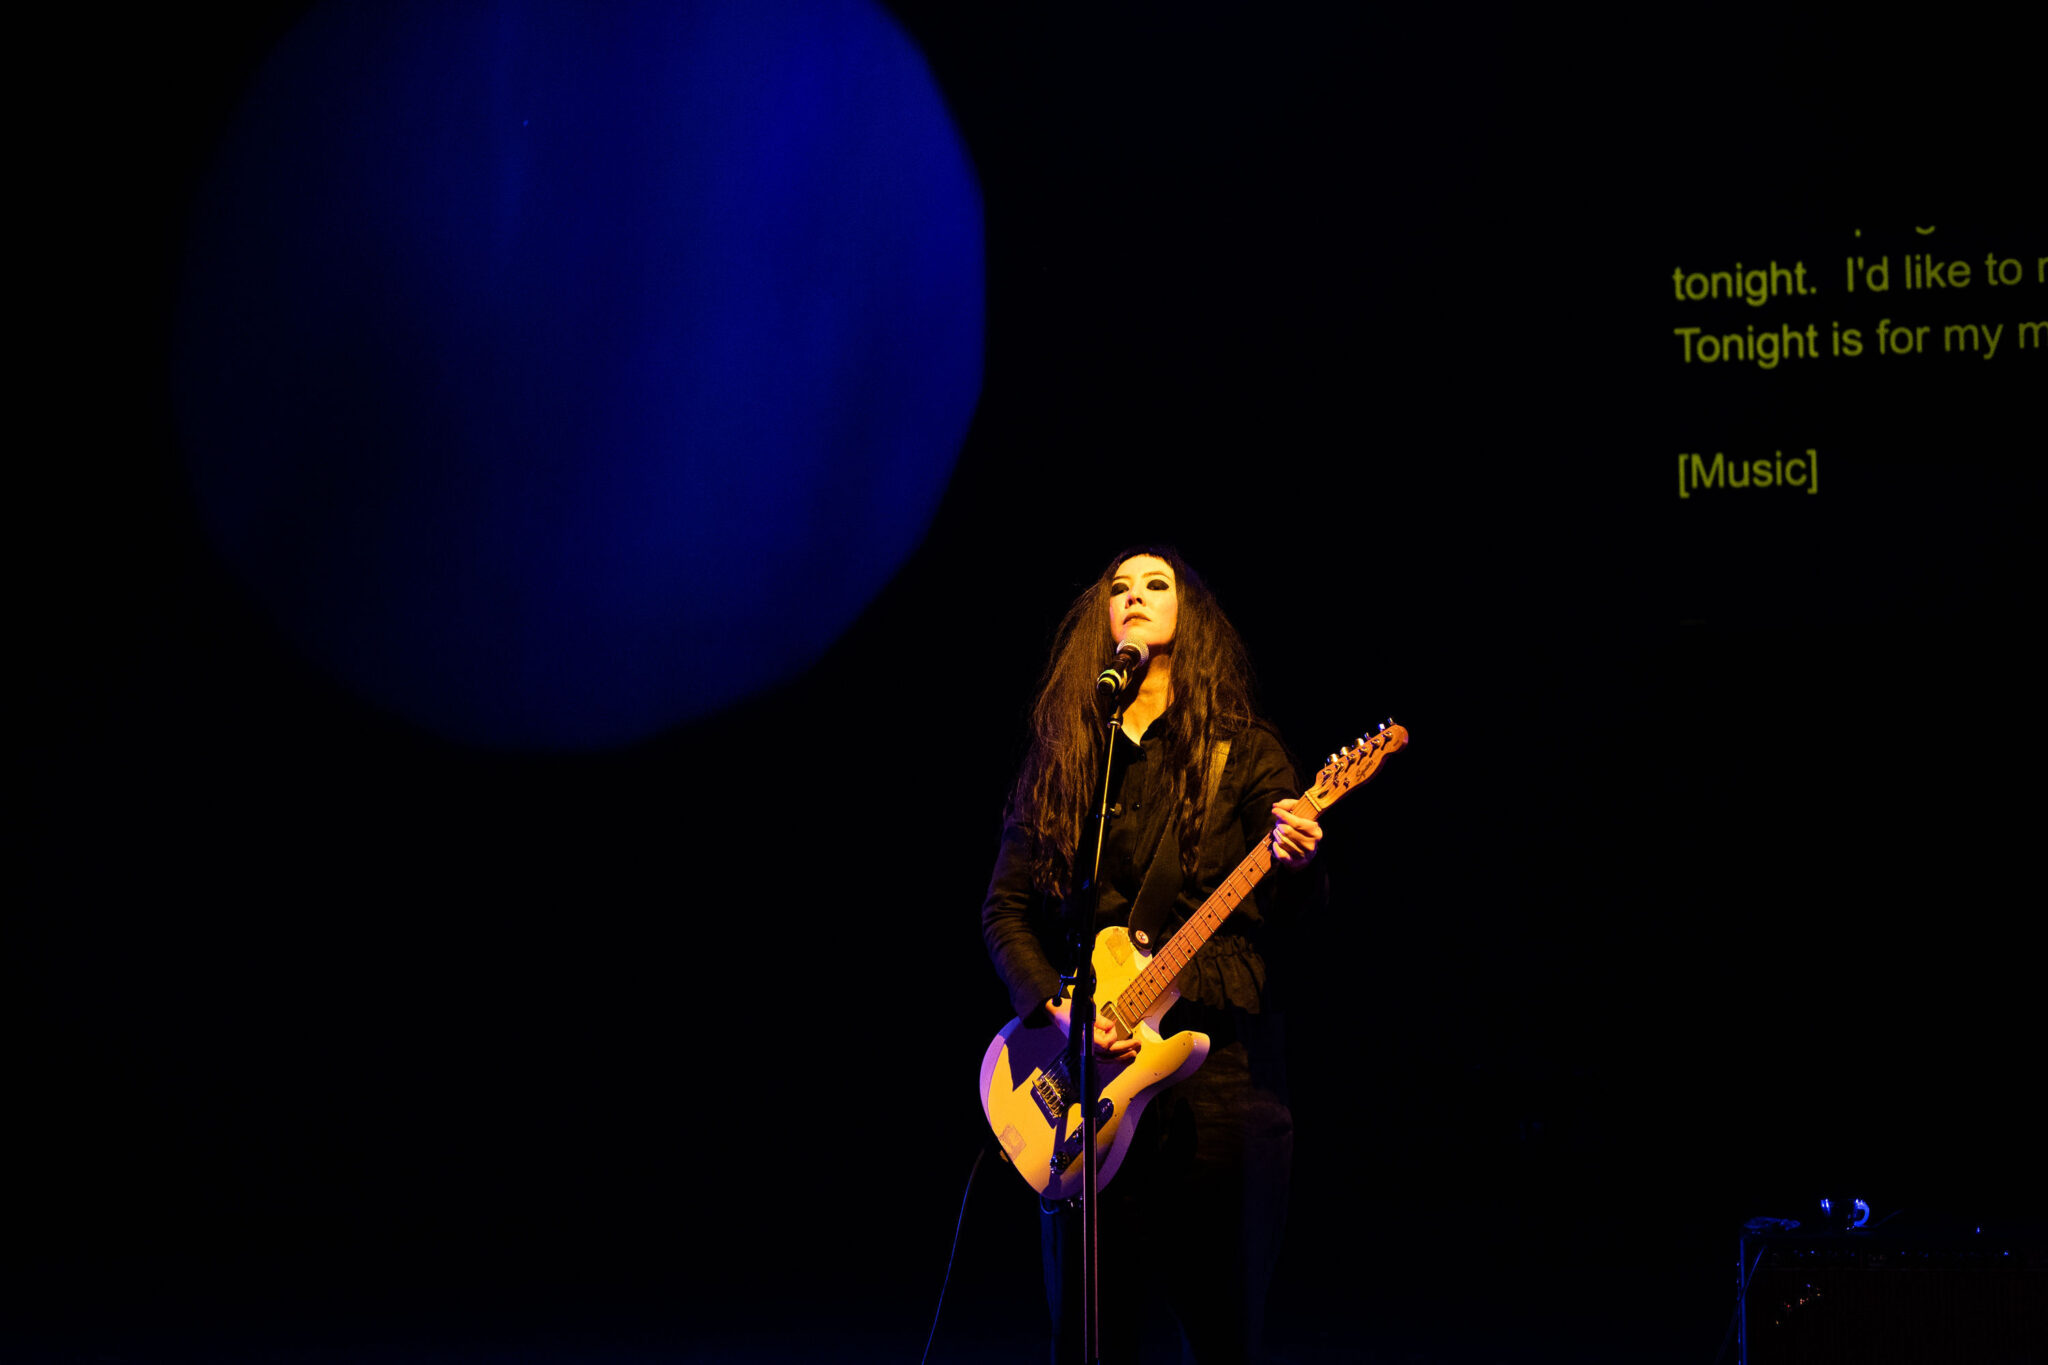 Johanna on a dark stage, dimly lit with a yellow spotlight, guitar in hand